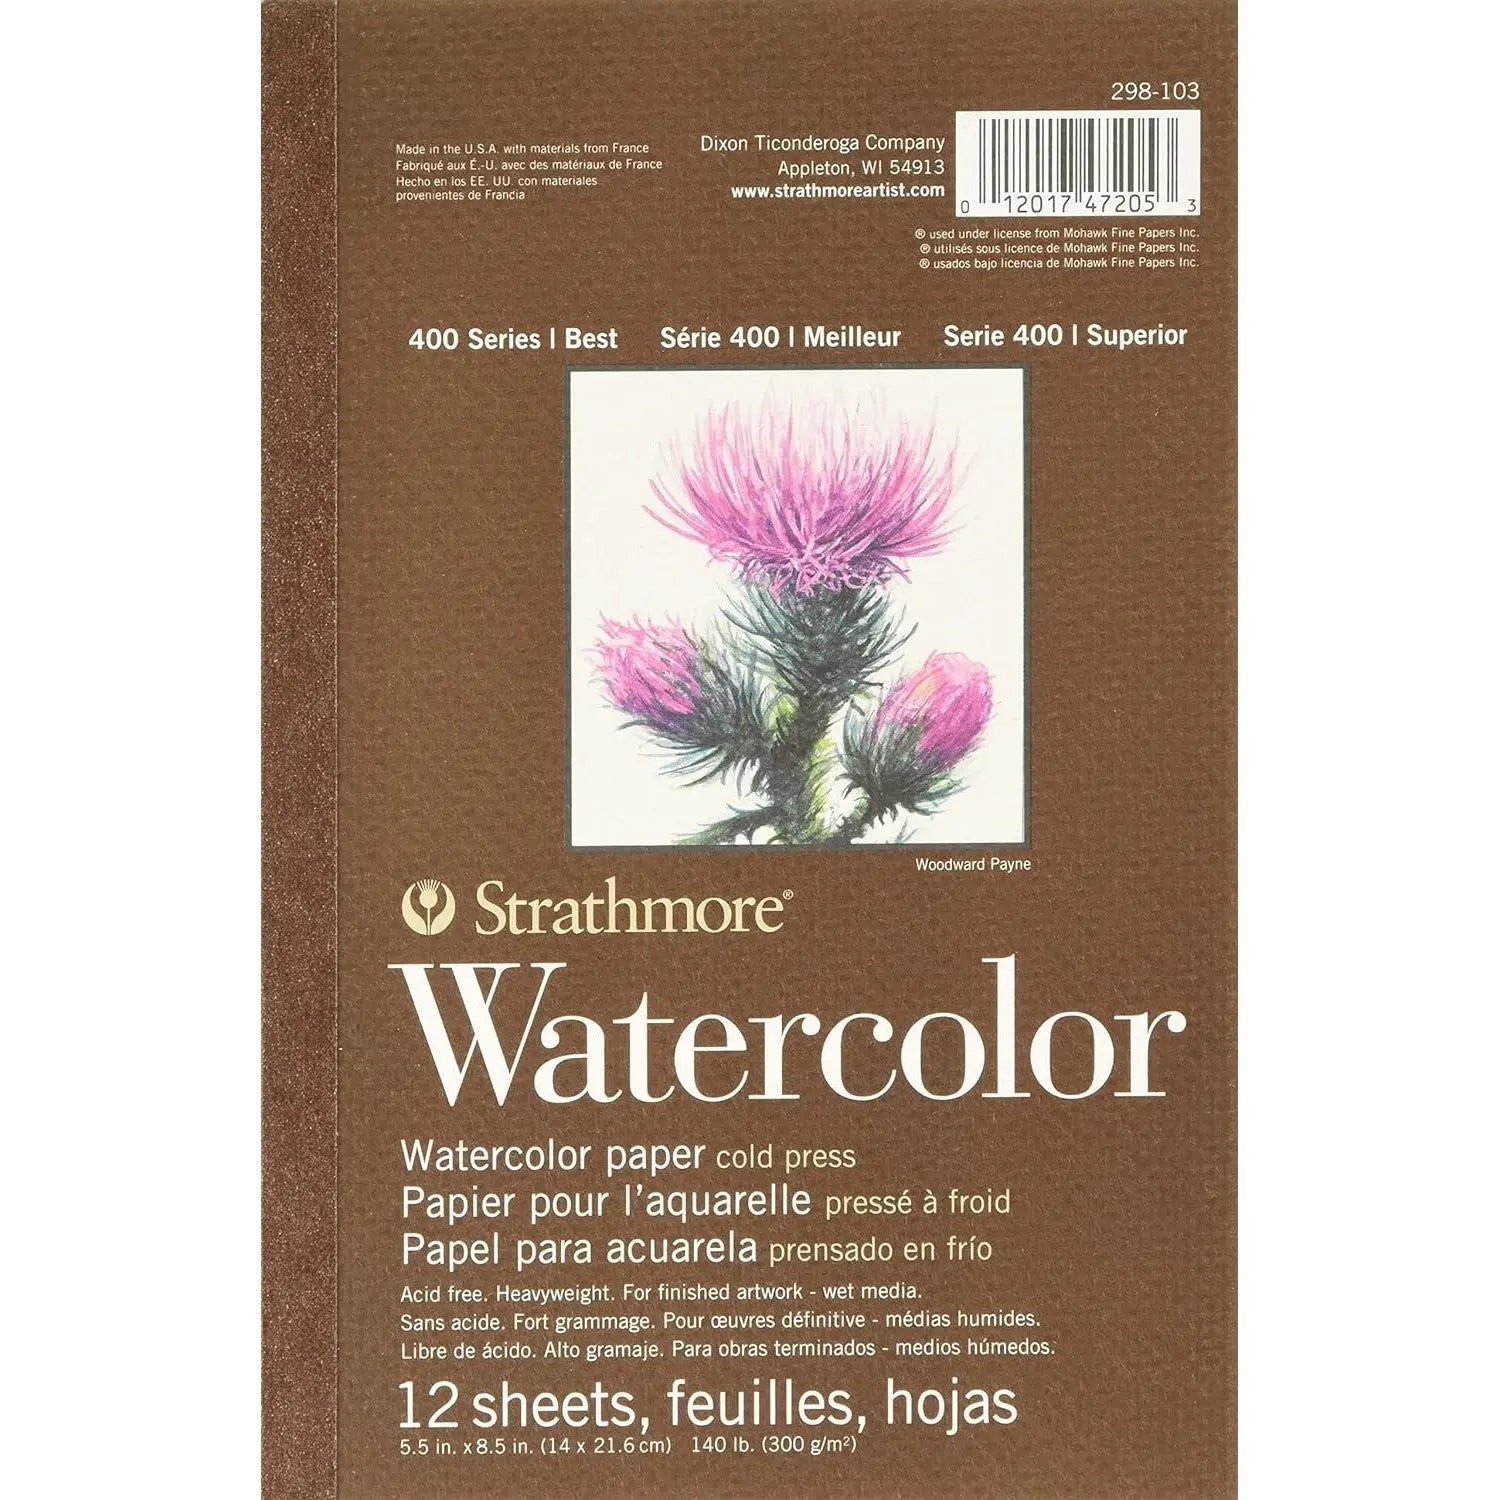 Strathmore 400 Series Watercolor Paper 12 SHT,300 GSM - 5.5